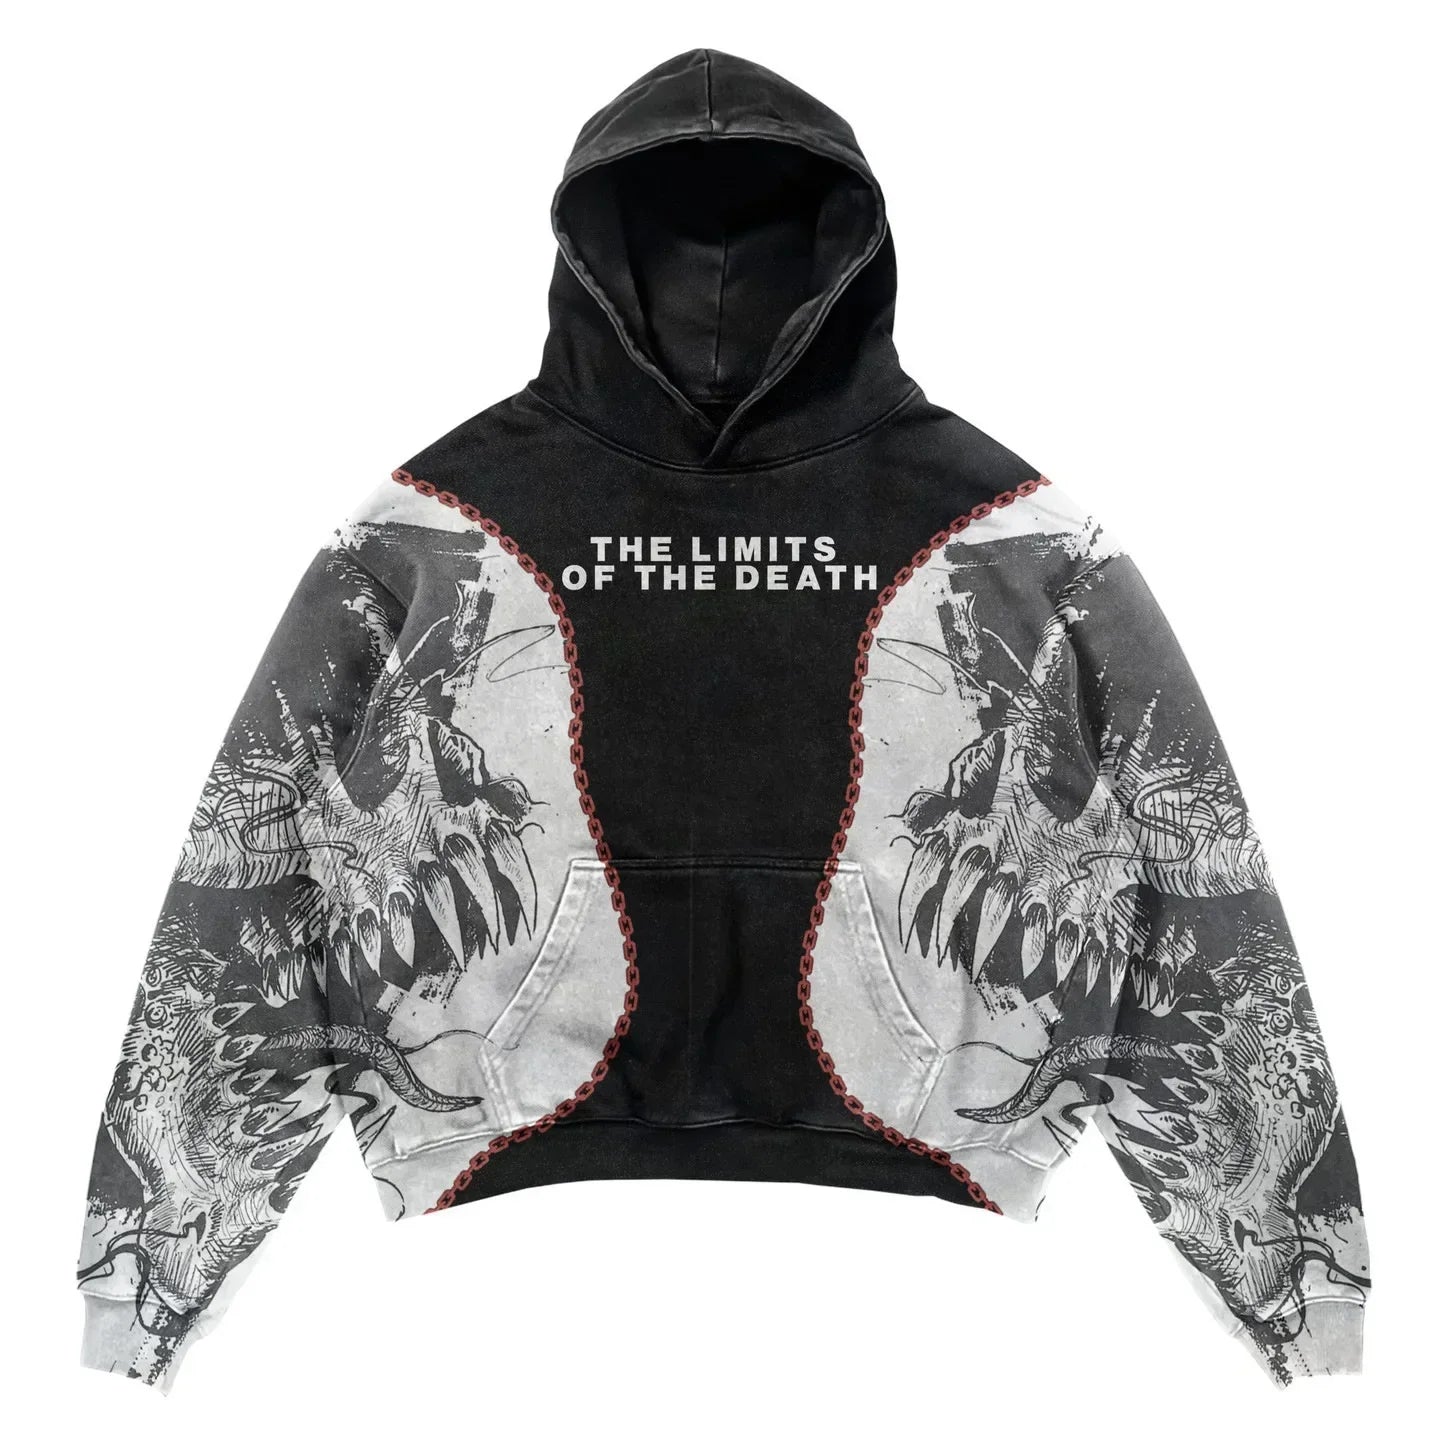 A black hoodie with a graphic design featuring skeletal imagery and the text "THE LIMITS OF THE DEATH" on the chest. Perfect for Men's Fashion, the sleeves and midsection are adorned with intricate, symmetrical skeletal patterns. This Explosions Printed Skull Y2K Retro Hooded Sweater Coat Street Style Gothic Casual Fashion Hooded Sweater Men's Female is an essential from Maramalive™.